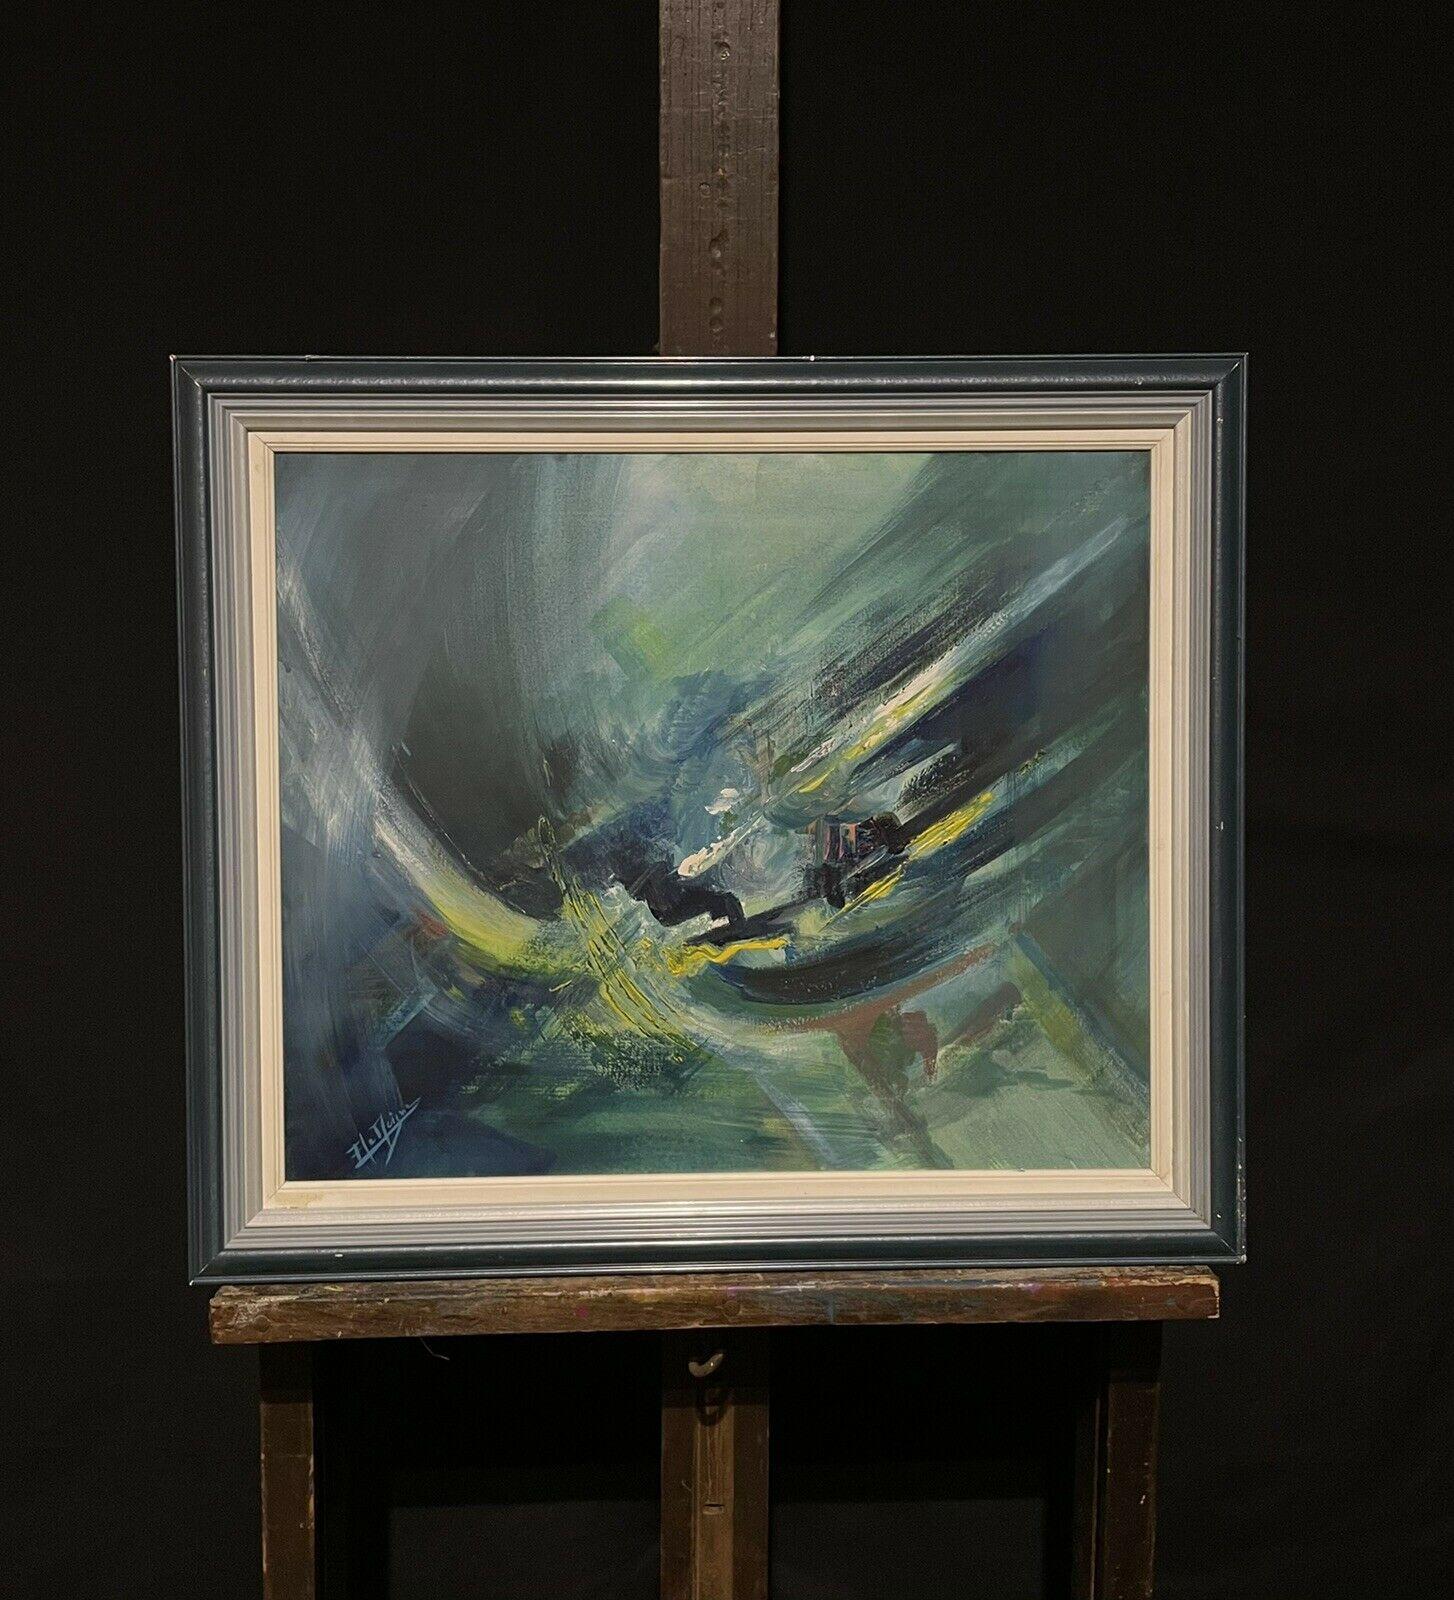 Artist/ School: French expressionist/ abstract artist, 20th century, indistinctly signed

Title: abstract/ expressionist composition

Medium:  oil painting on canvas, framed

framed:   22.5 x 26 inches
canvas:   18.25 x 21.75 inches

Provenance: